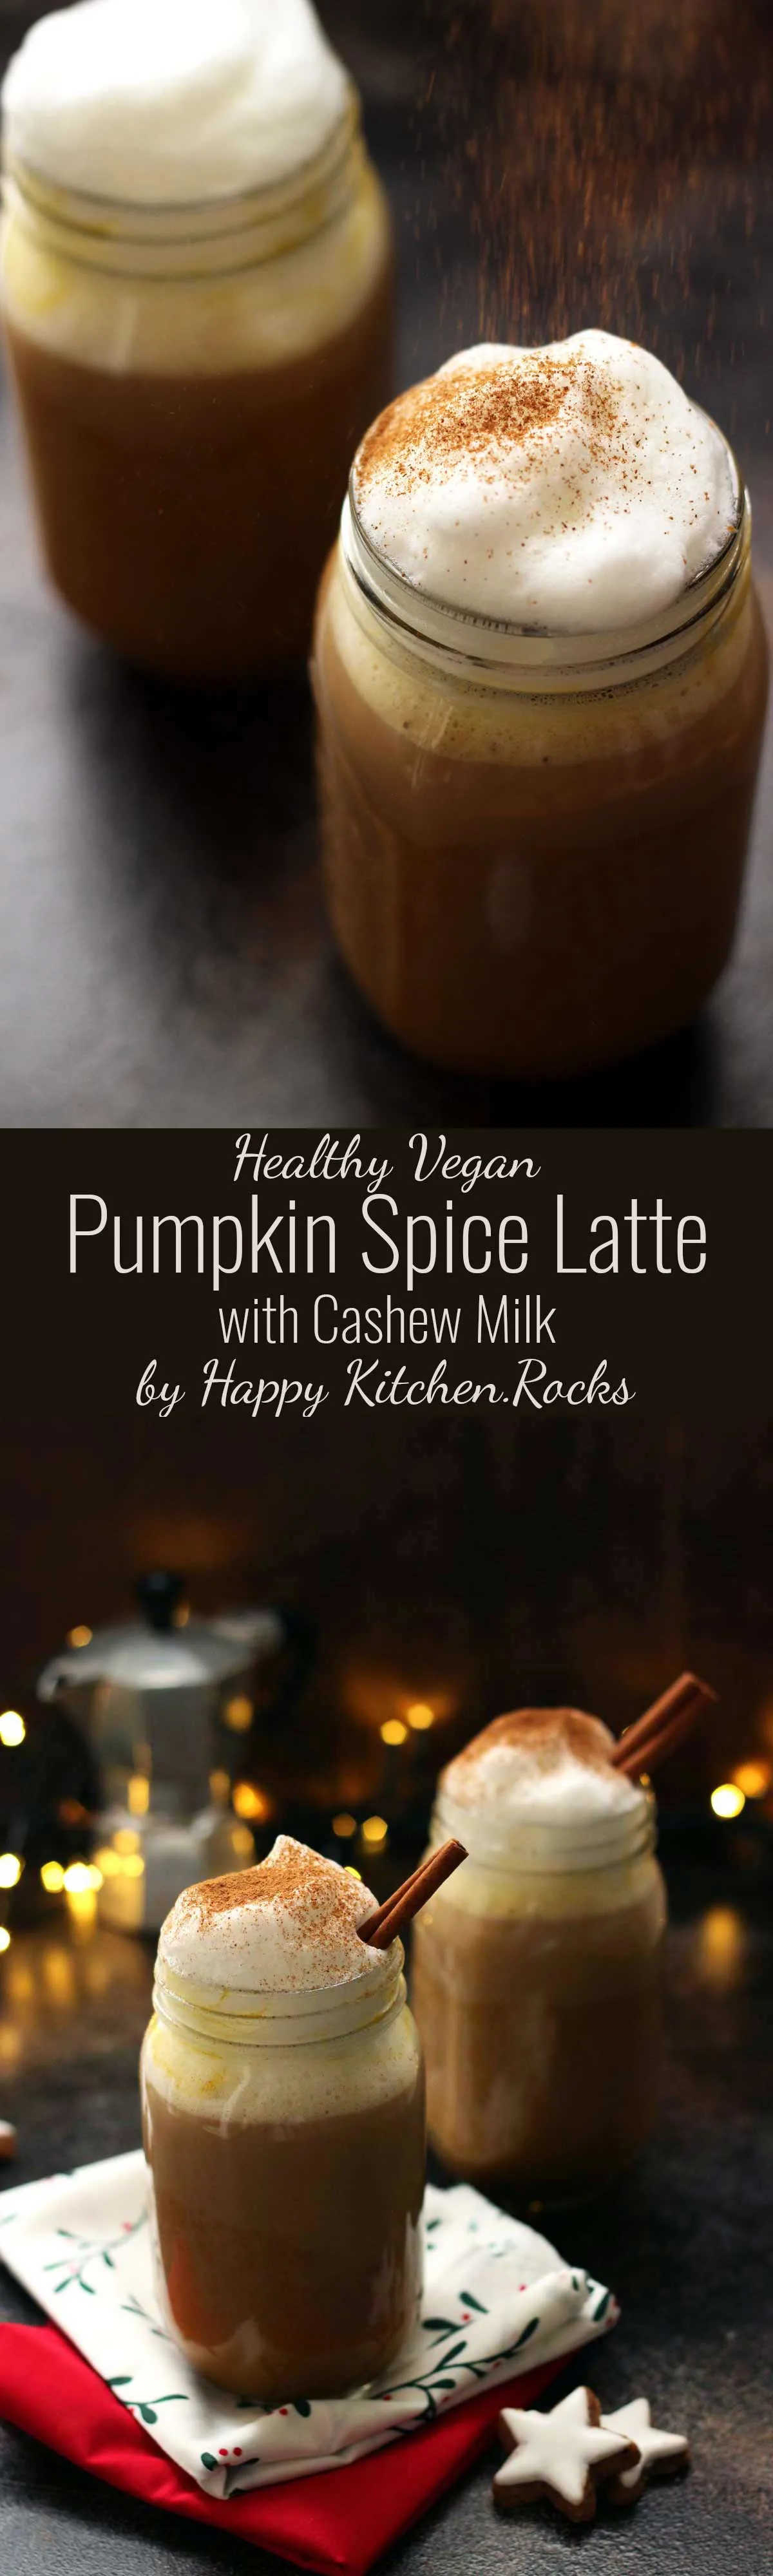 Healthy Vegan Pumpkin Spice Latte Collage of Two Recipe Images